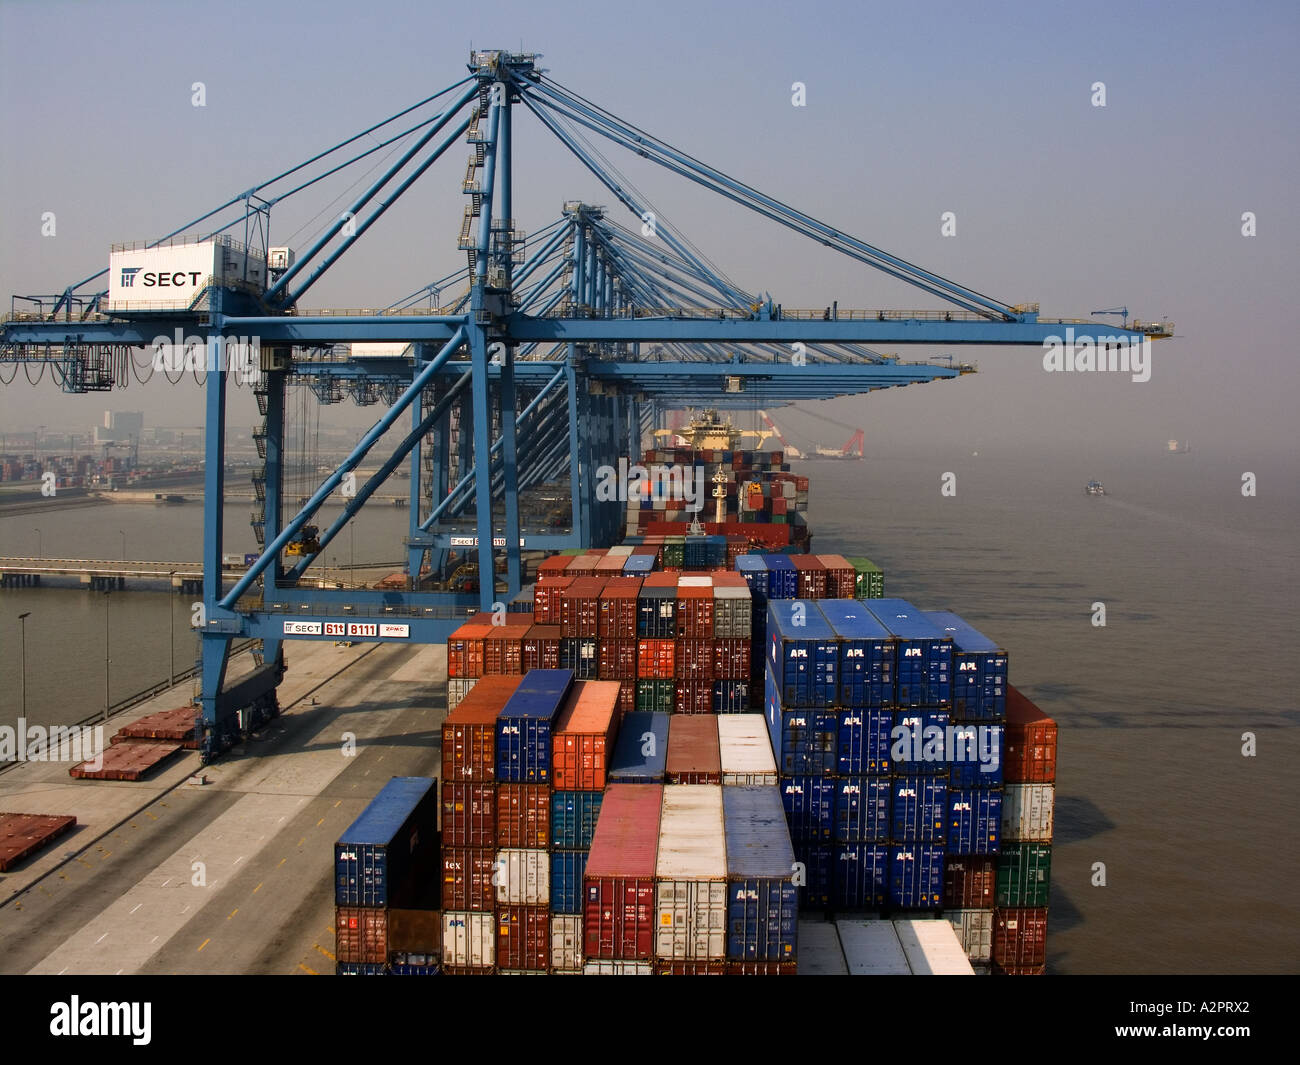 Container vessel at container terminal. Cargo operations in progress. Stock Photo